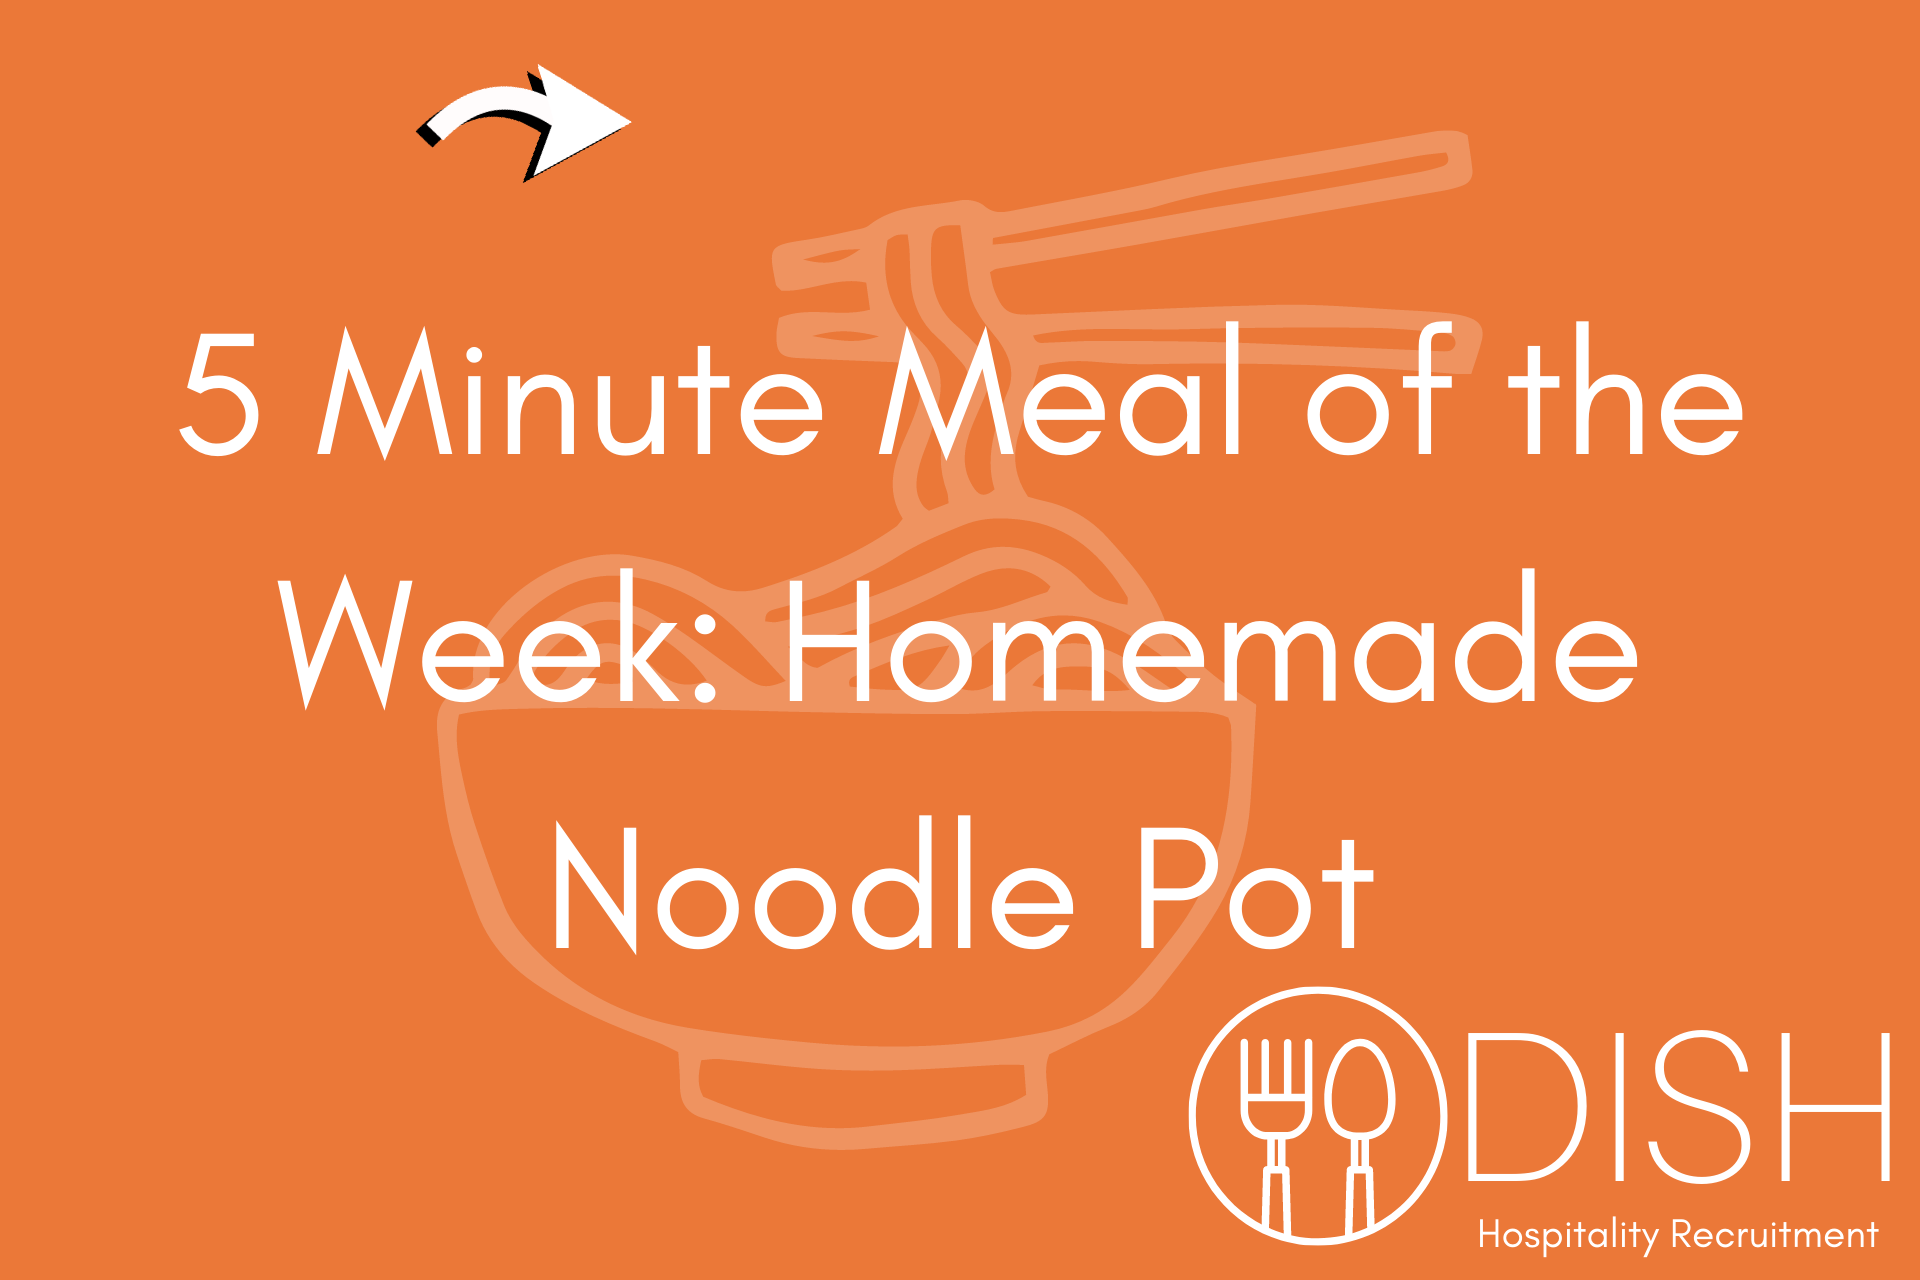 5 Minute Meal of the Week: Homemade Noodle Pot